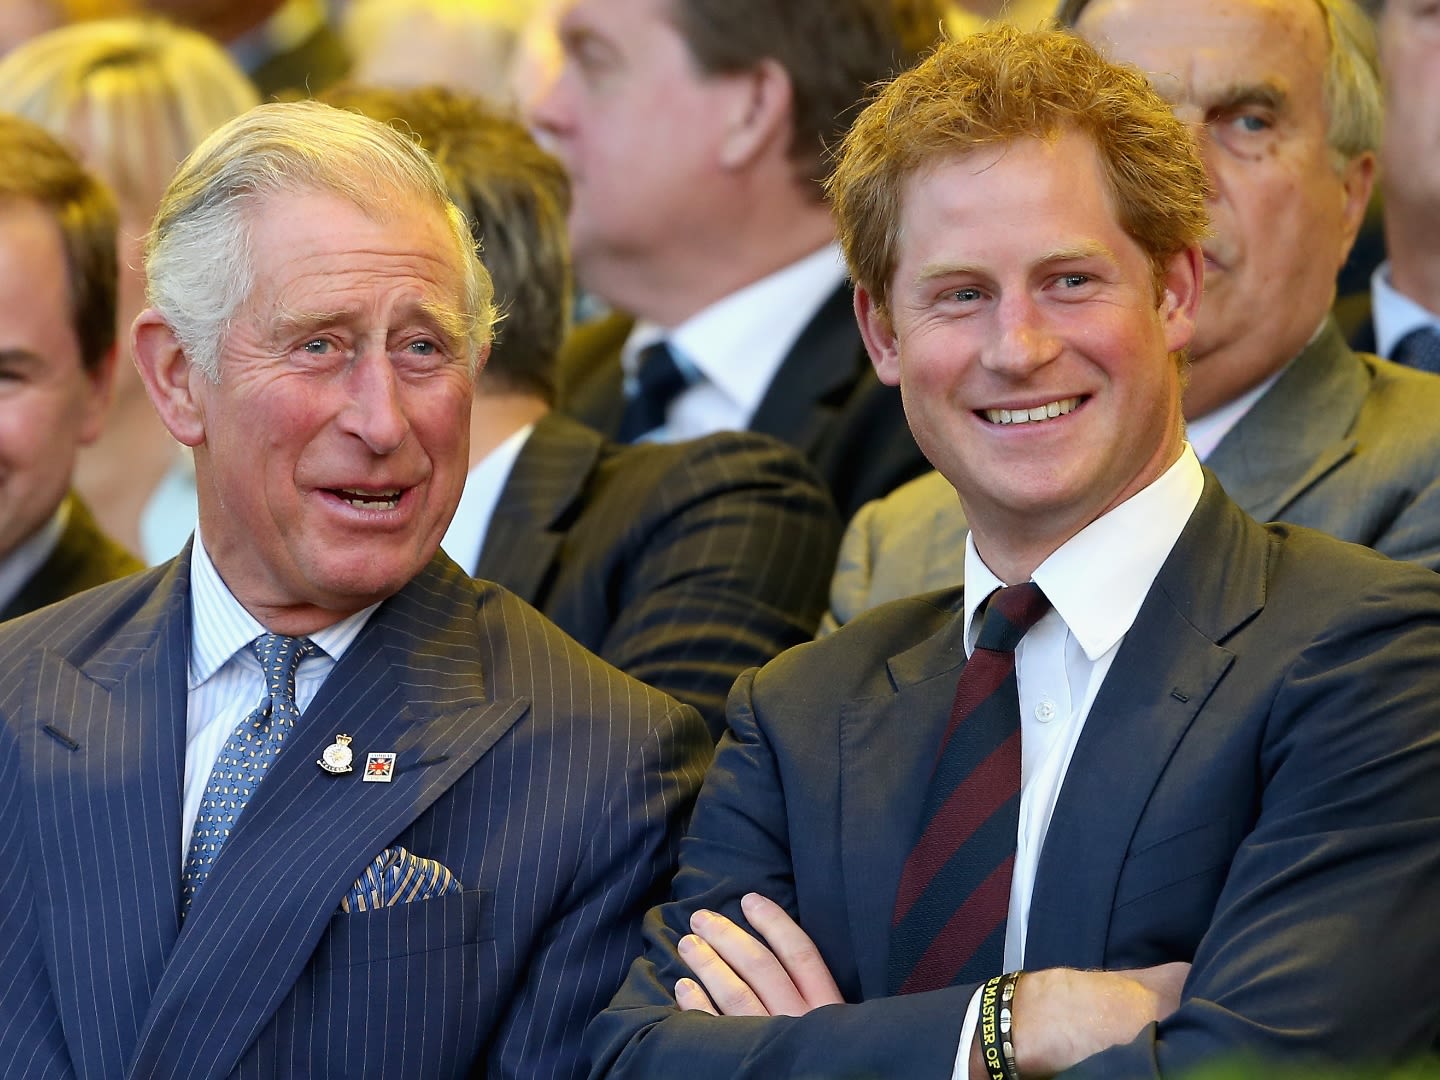 Prince Harry's Invictus Games Is Reportedly Seen as a 'Hostile, Rival Royal Operation'